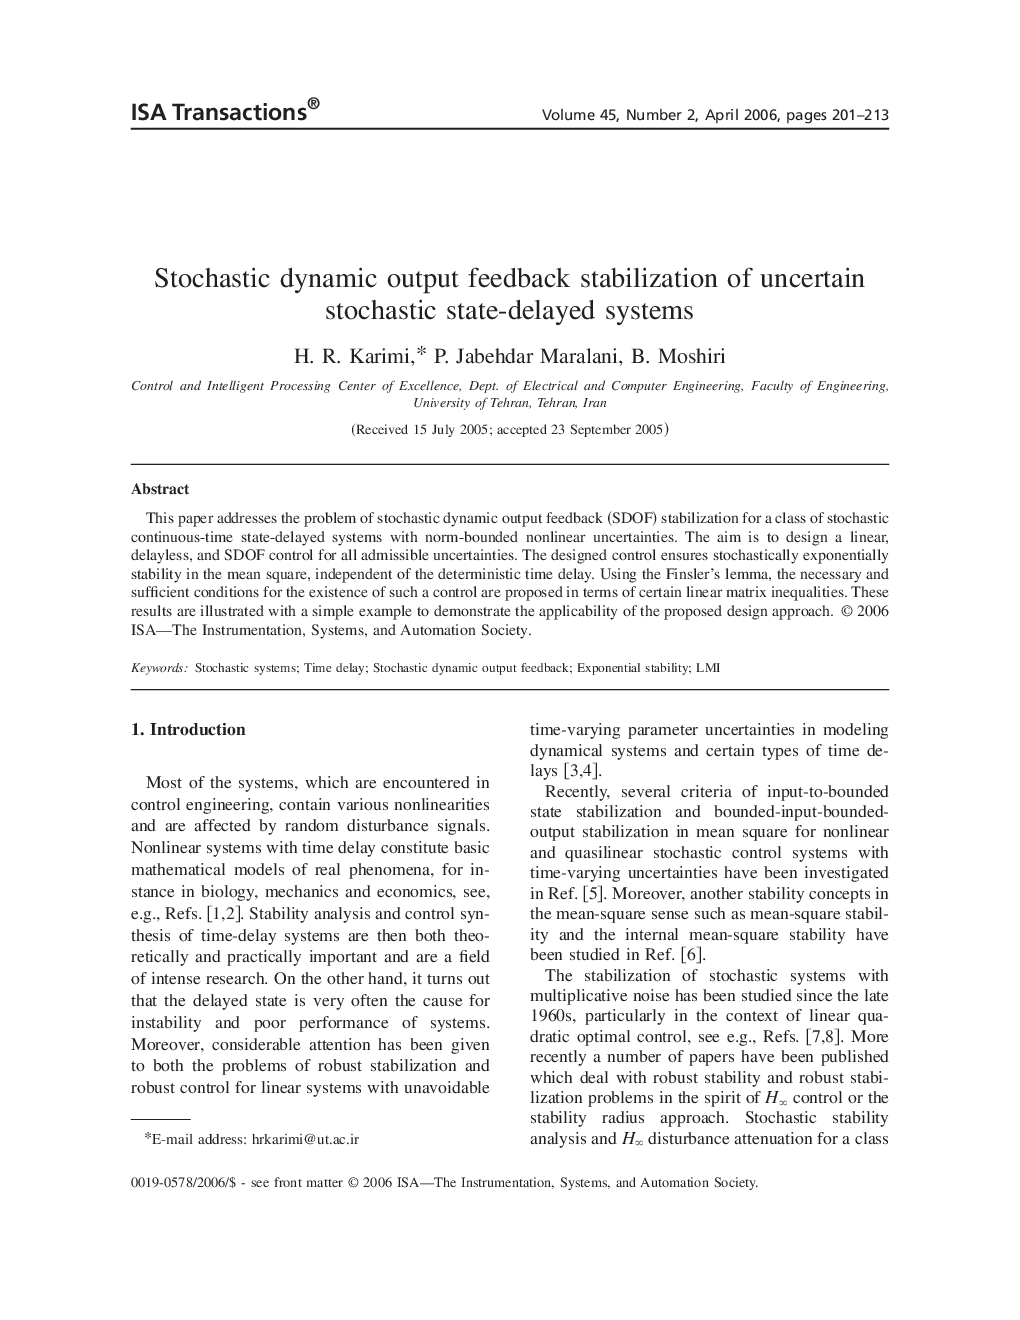 Stochastic dynamic output feedback stabilization of uncertain stochastic state-delayed systems